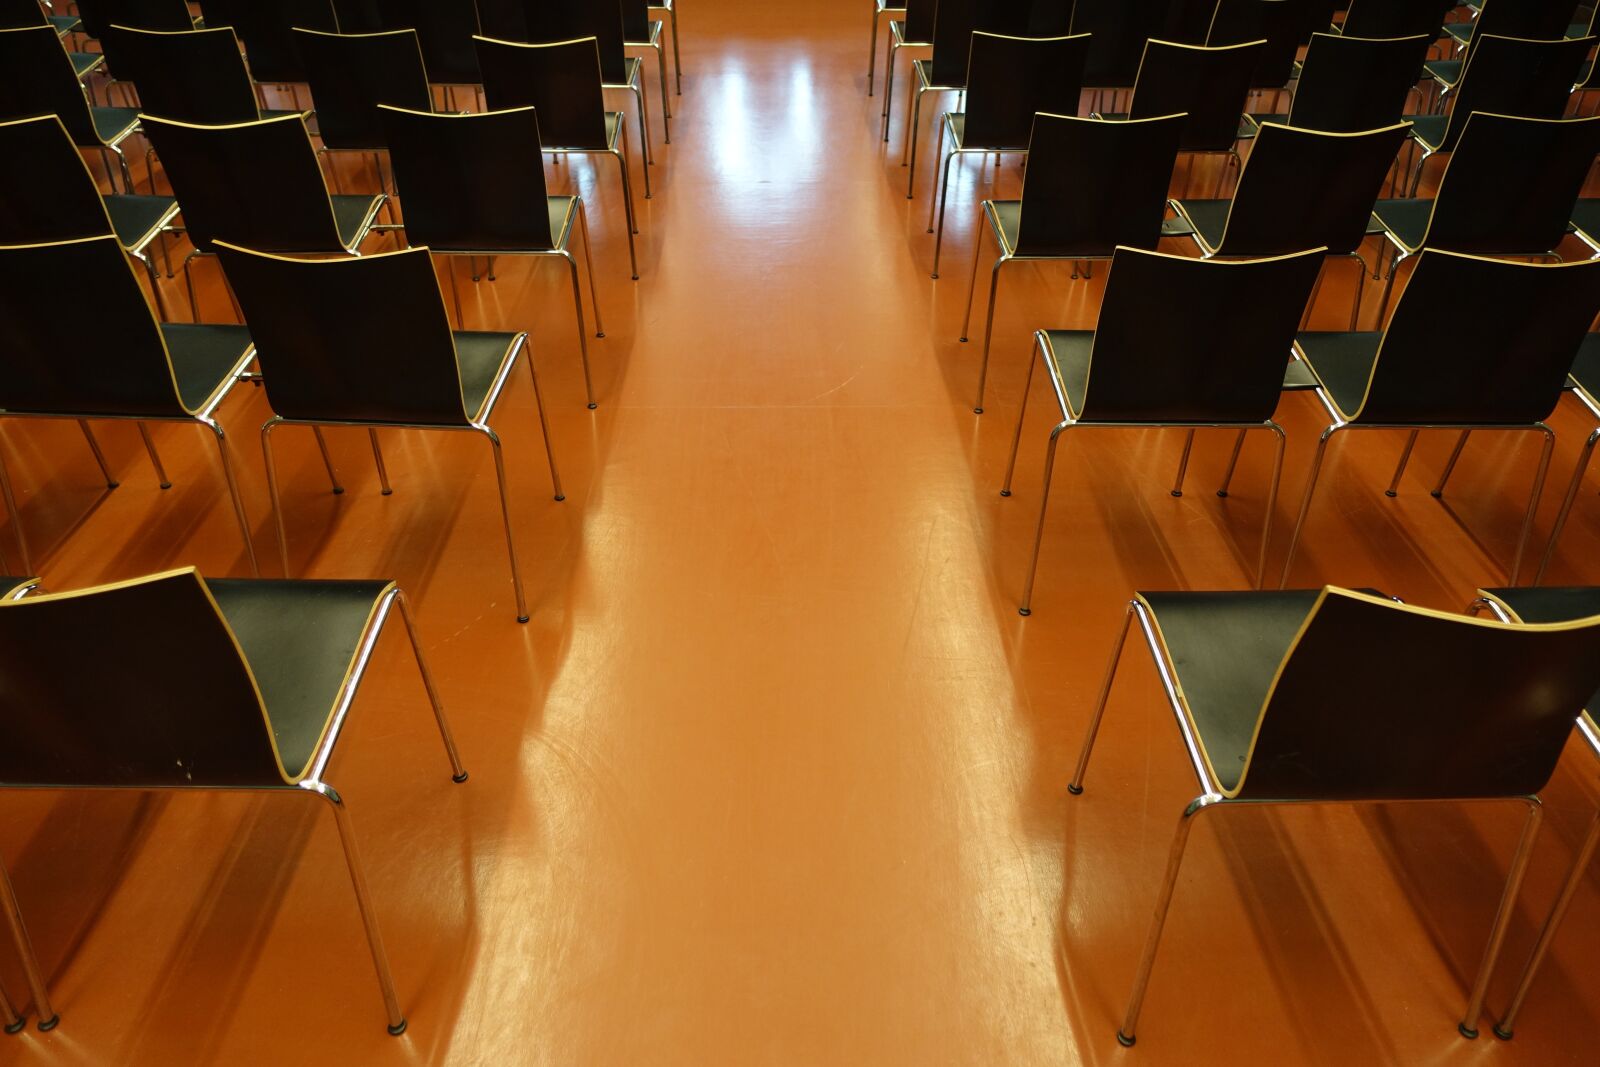 Sony Cyber-shot DSC-RX100 III sample photo. Auditorium, chairs, audience photography